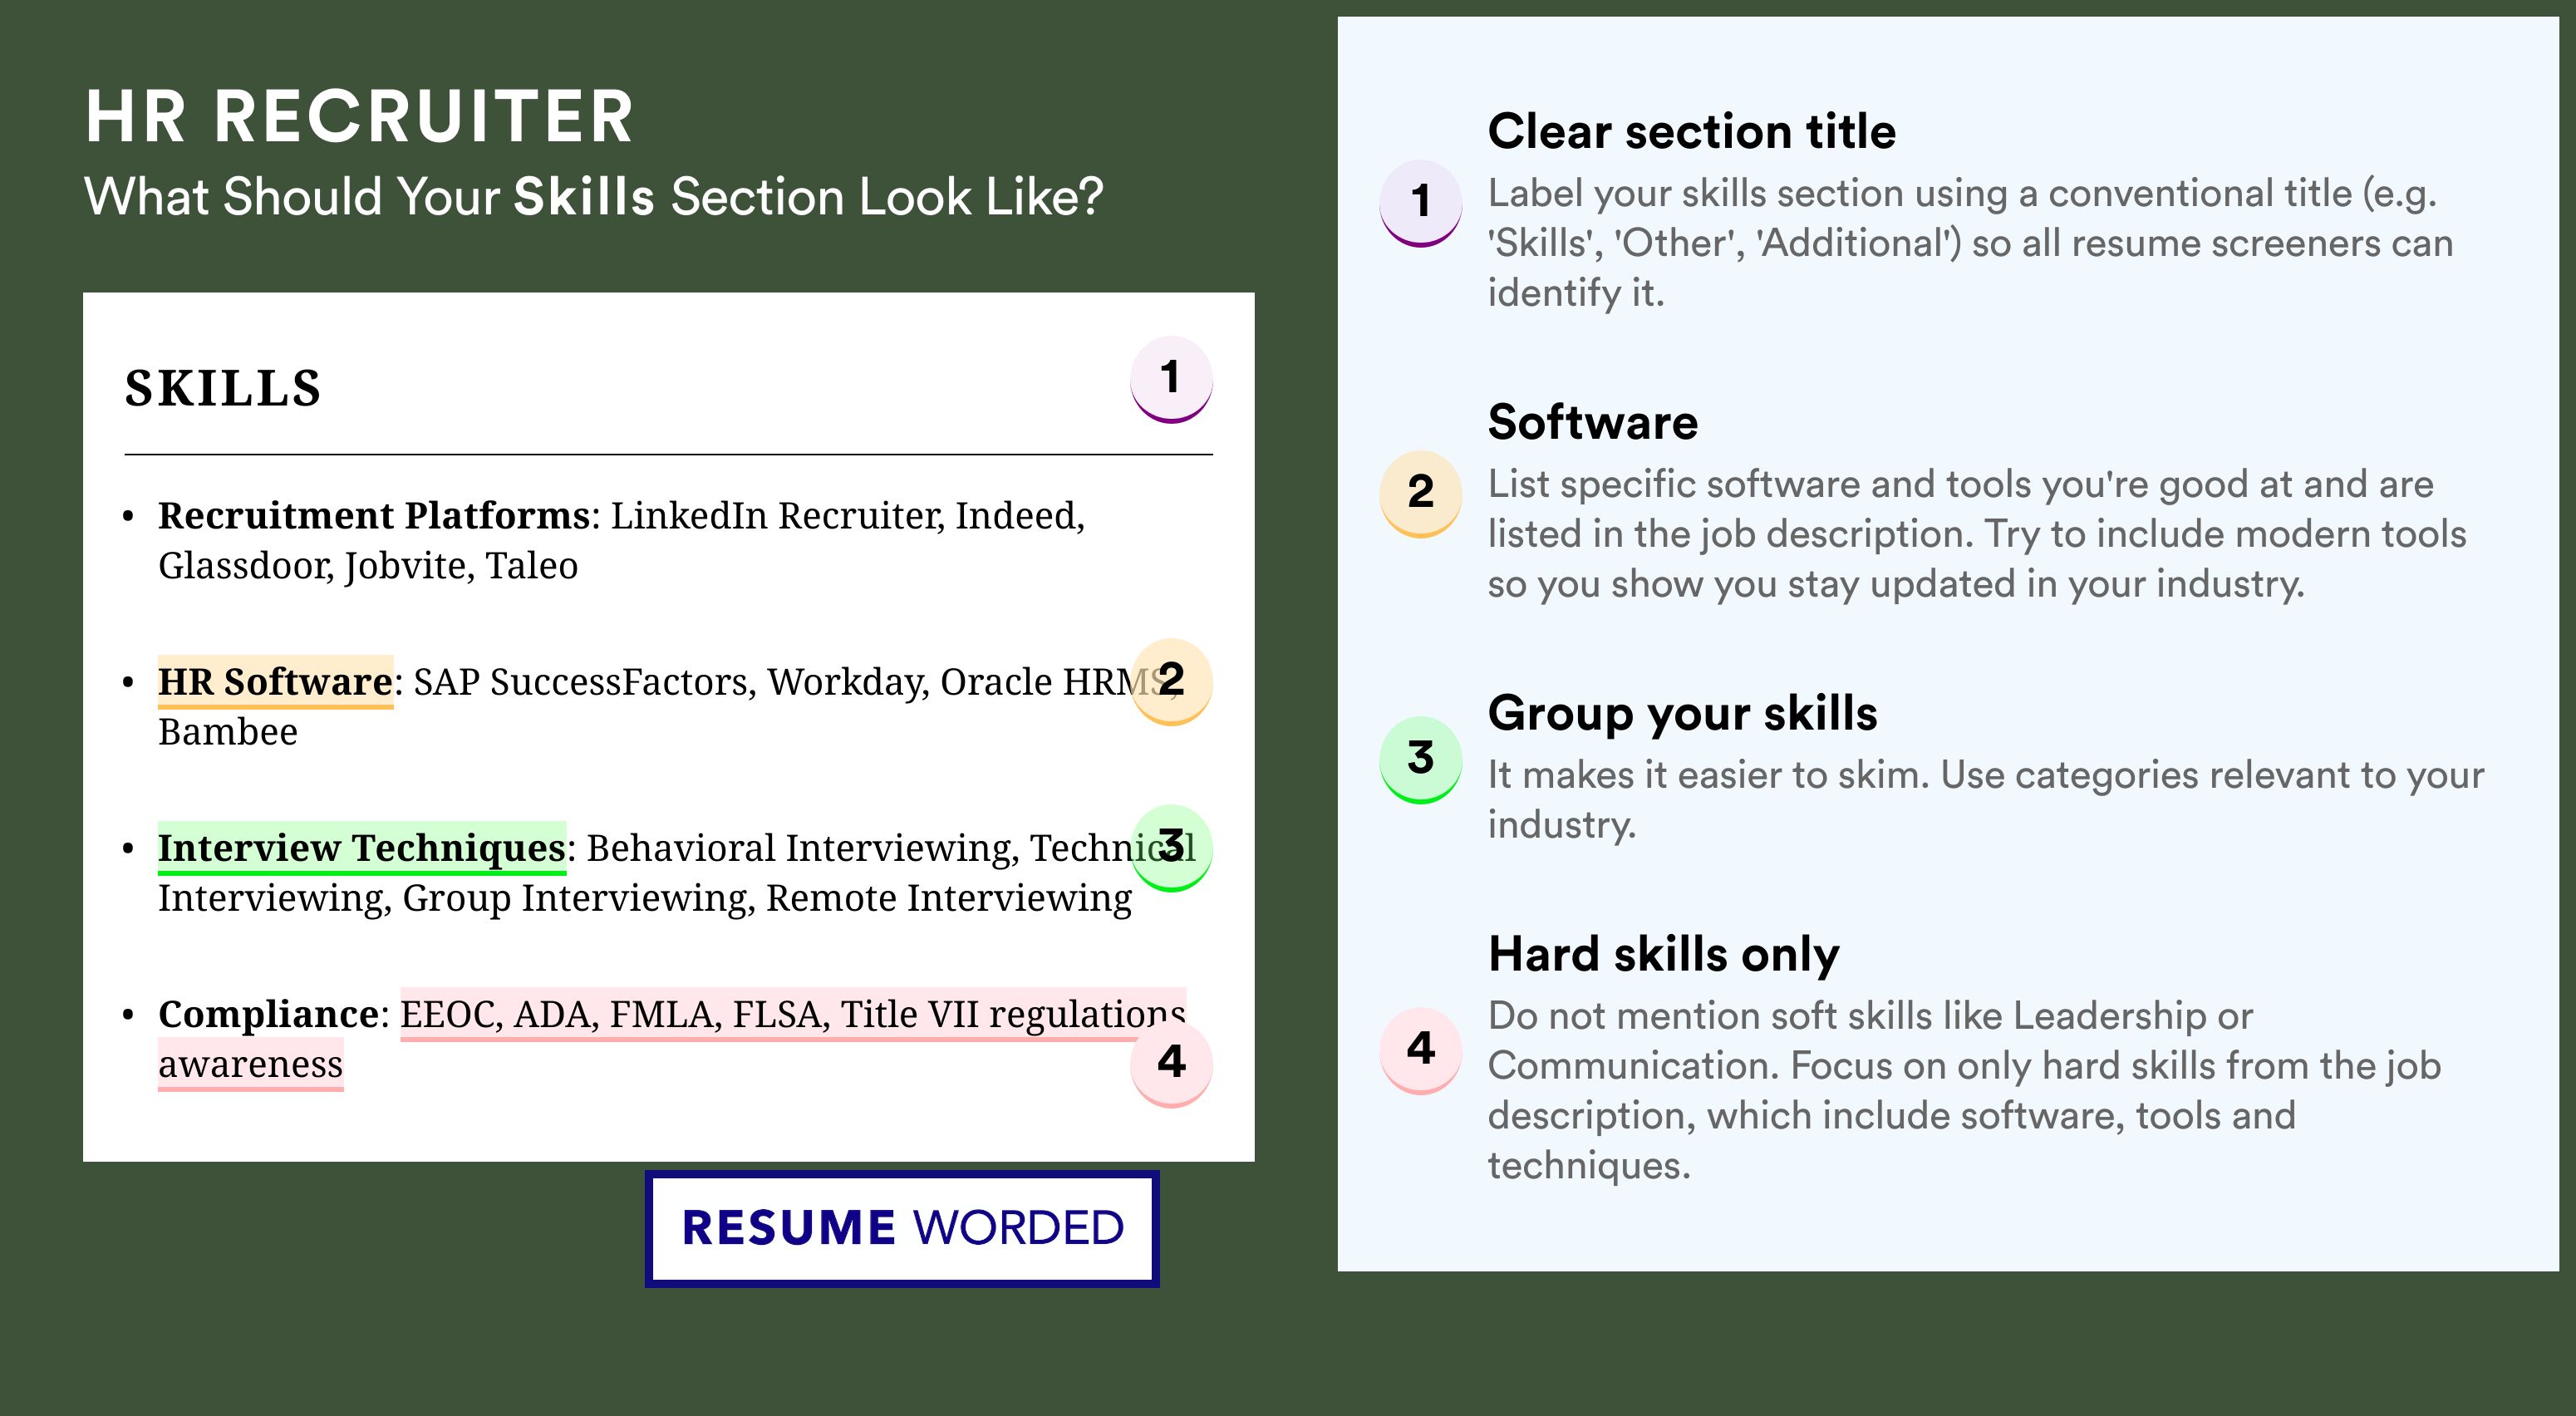 How To Write Your Skills Section - HR Recruiter Roles